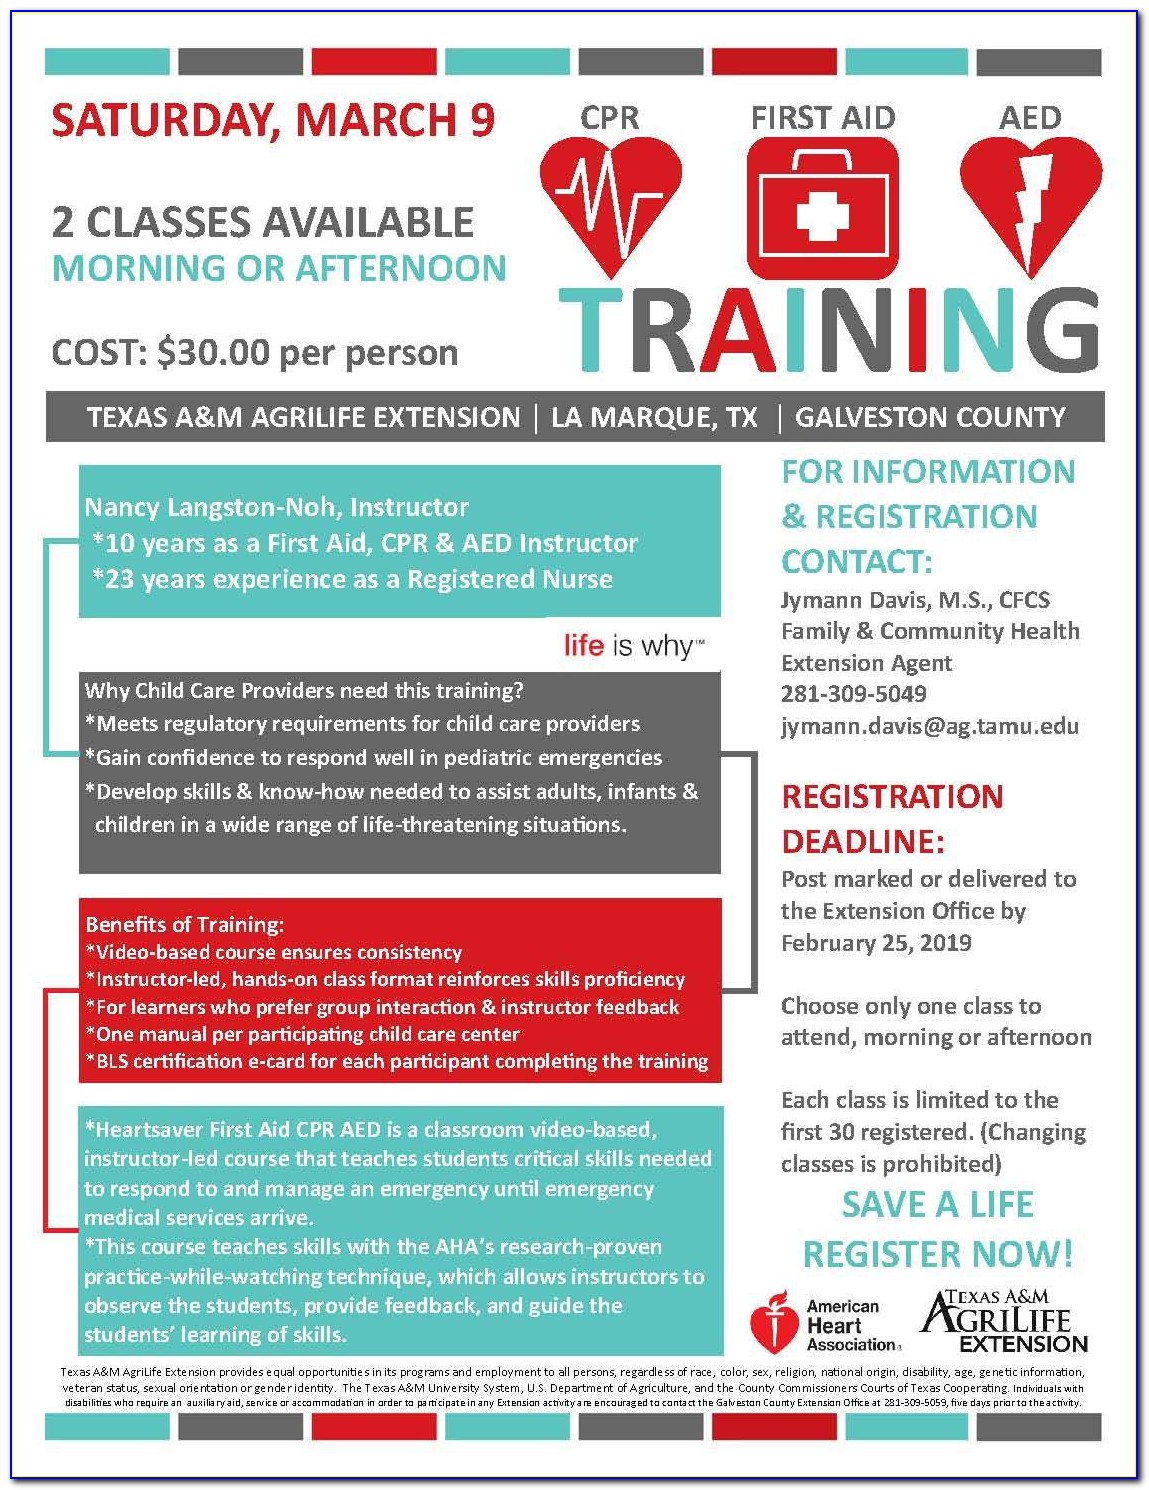 Enjoycpr (cpr & First Aid Classes Multiple Locations) Boston Ma